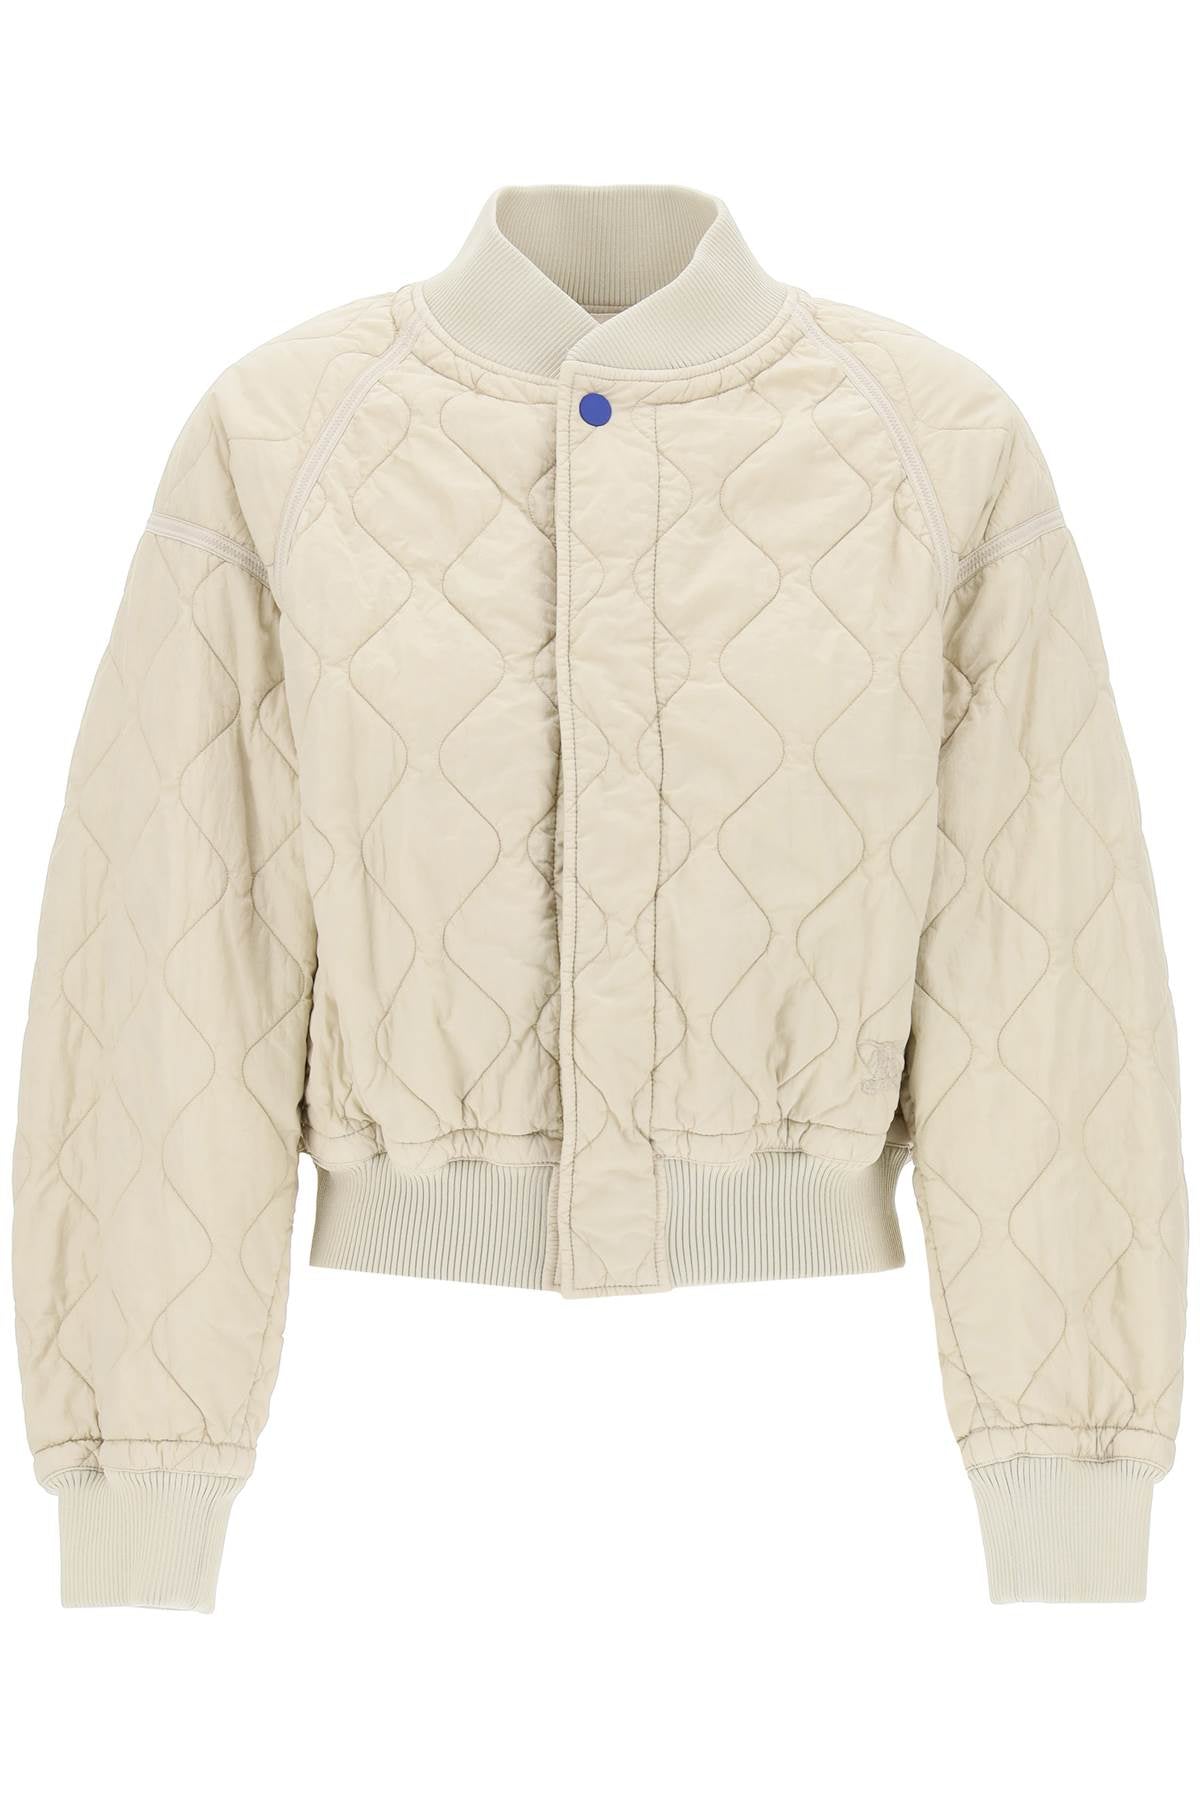 Burberry Quilted Bomber Jacket Women